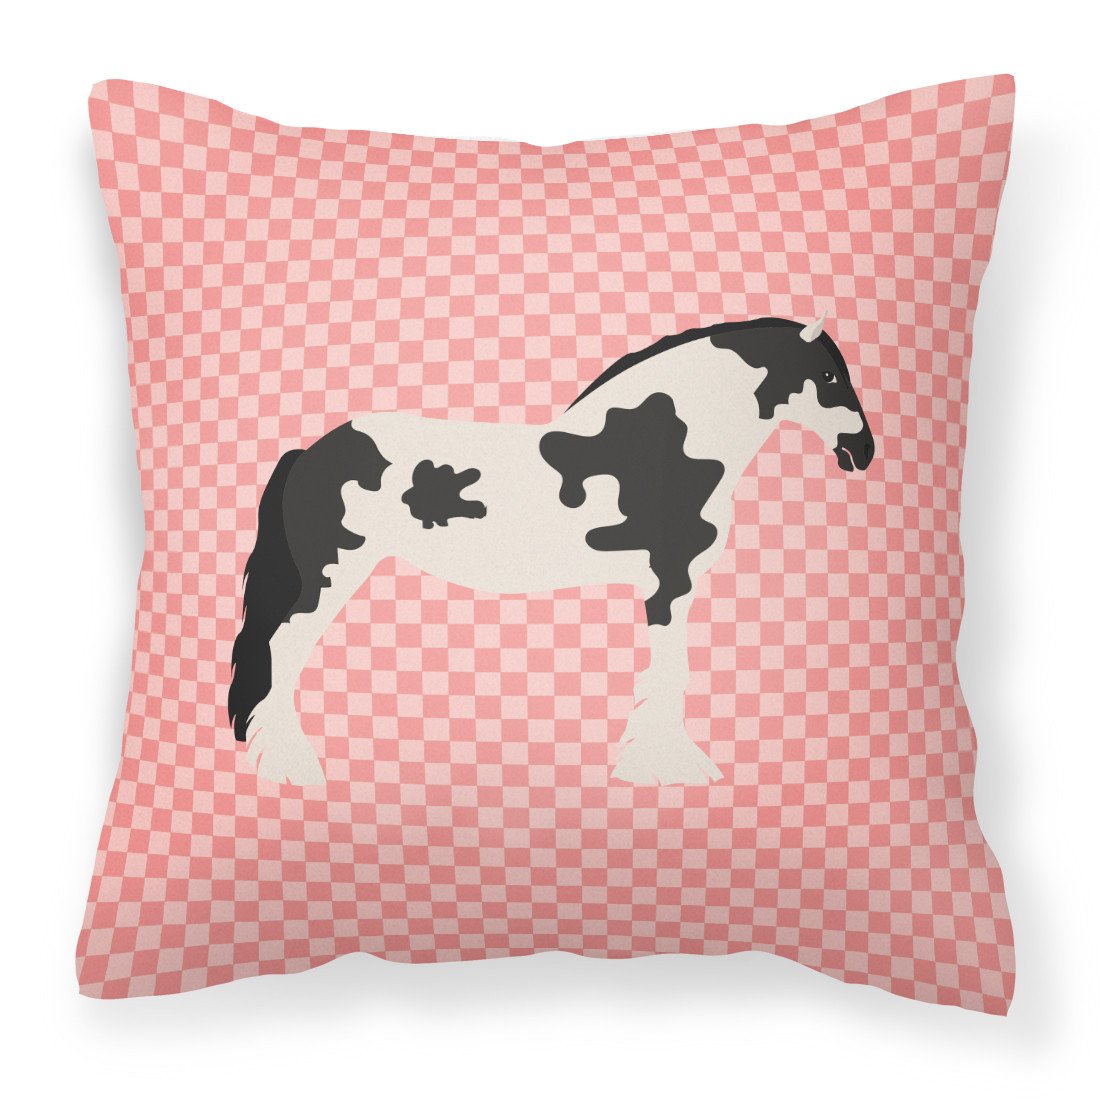 Cyldesdale Horse Pink Check Fabric Decorative Pillow BB7912PW1818 by Caroline's Treasures